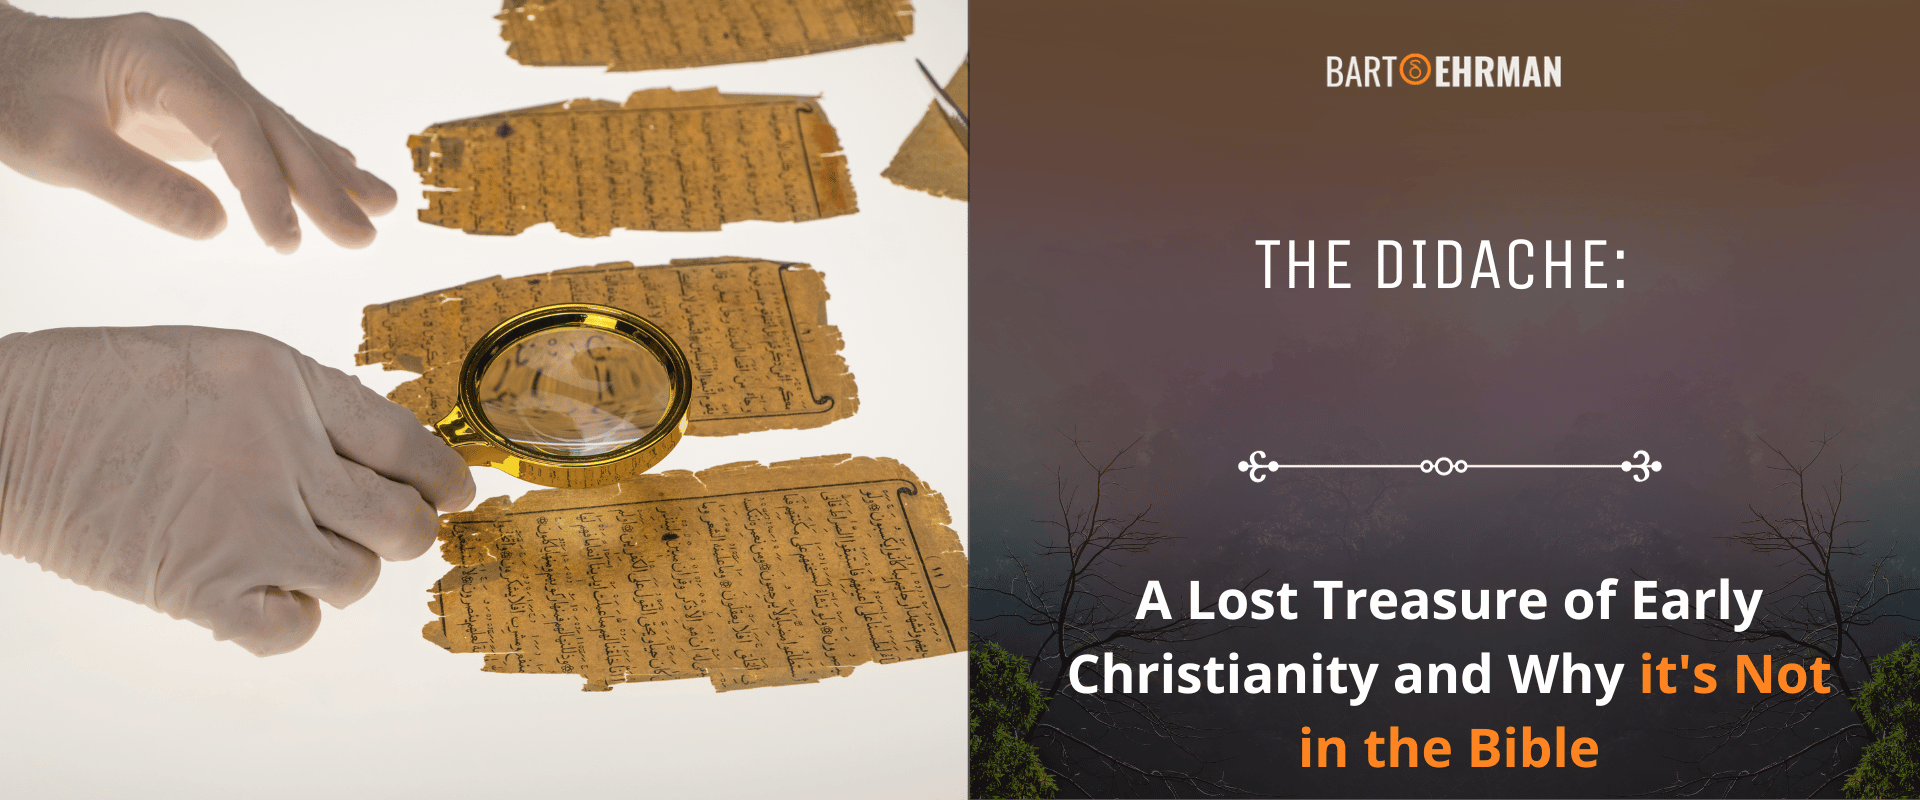 The Didache - A Lost Treasure of Early Christianity and Why it's Not in the Bible